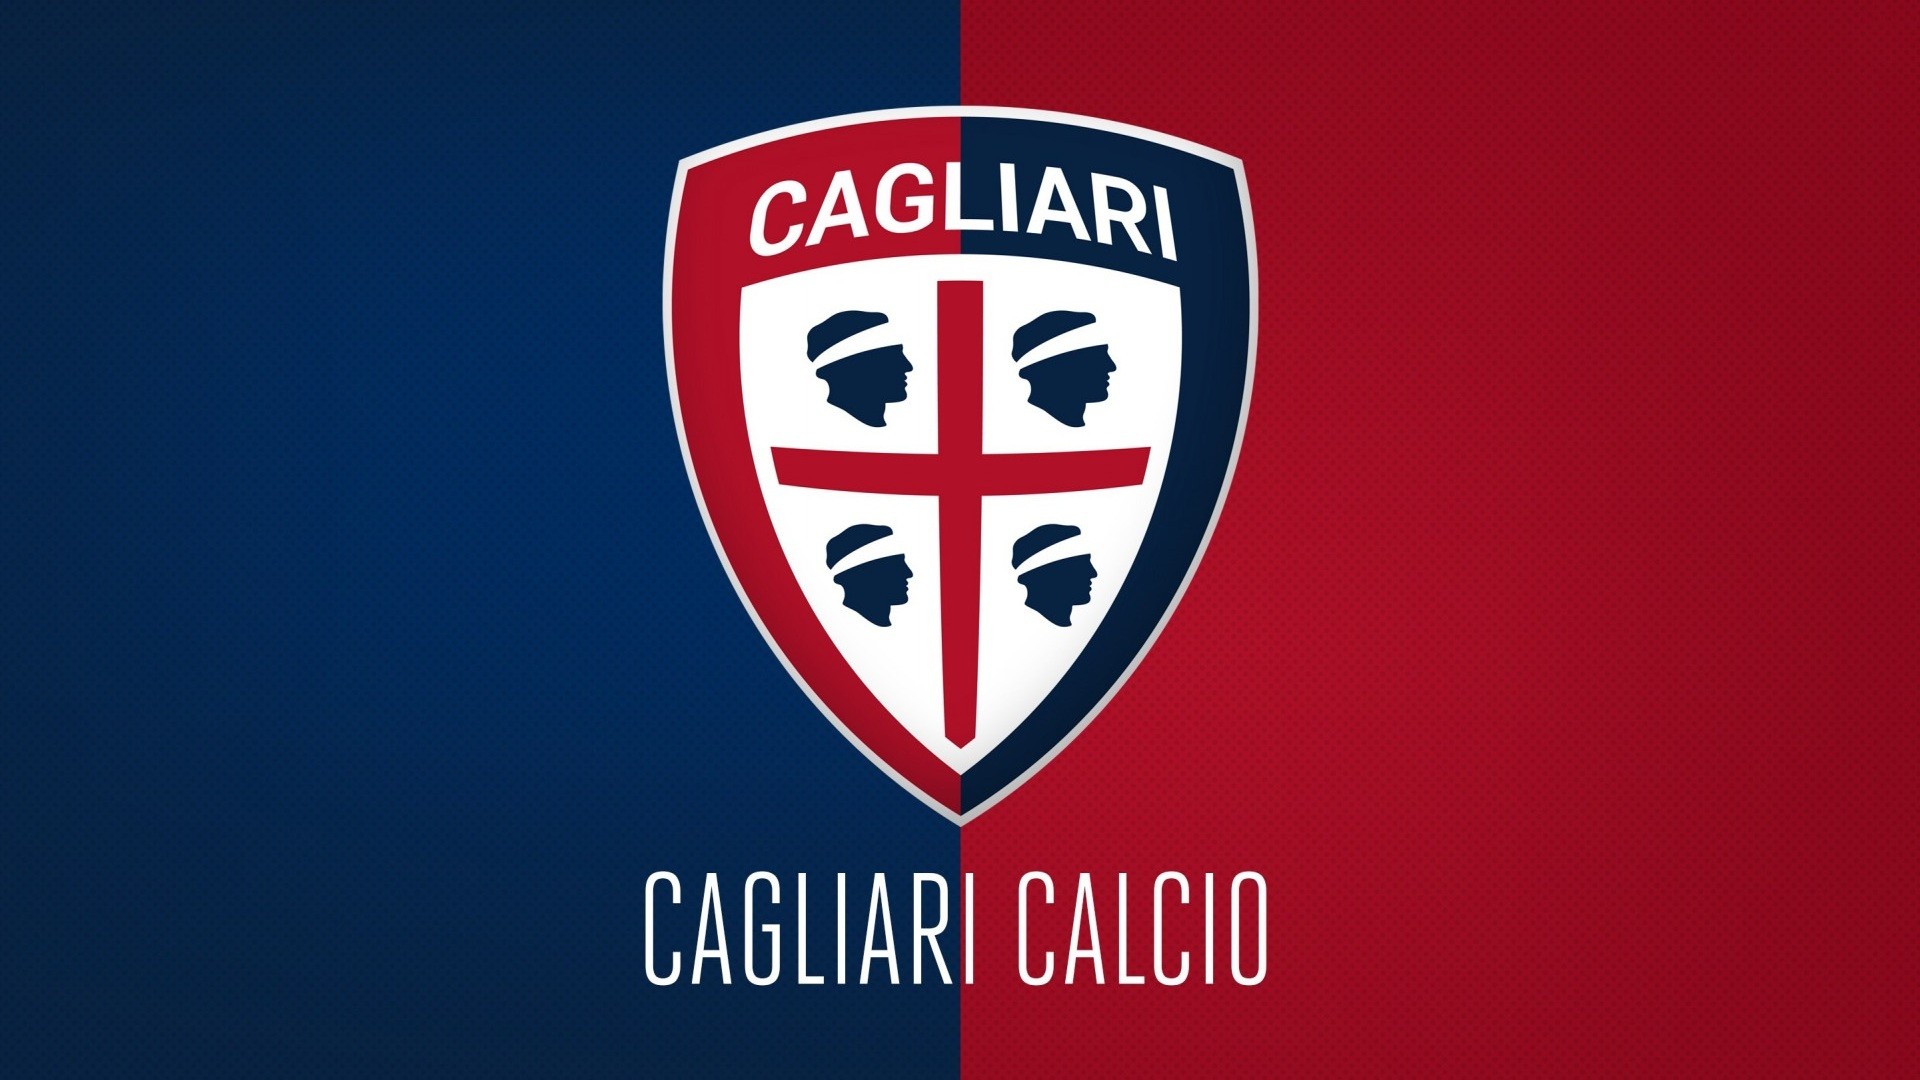 Cagliari Calcio Wallpaper HD with high-resolution 1920x1080 pixel. You can use this wallpaper for your Desktop Computers, Mac Screensavers, Windows Backgrounds, iPhone Wallpapers, Tablet or Android Lock screen and another Mobile device